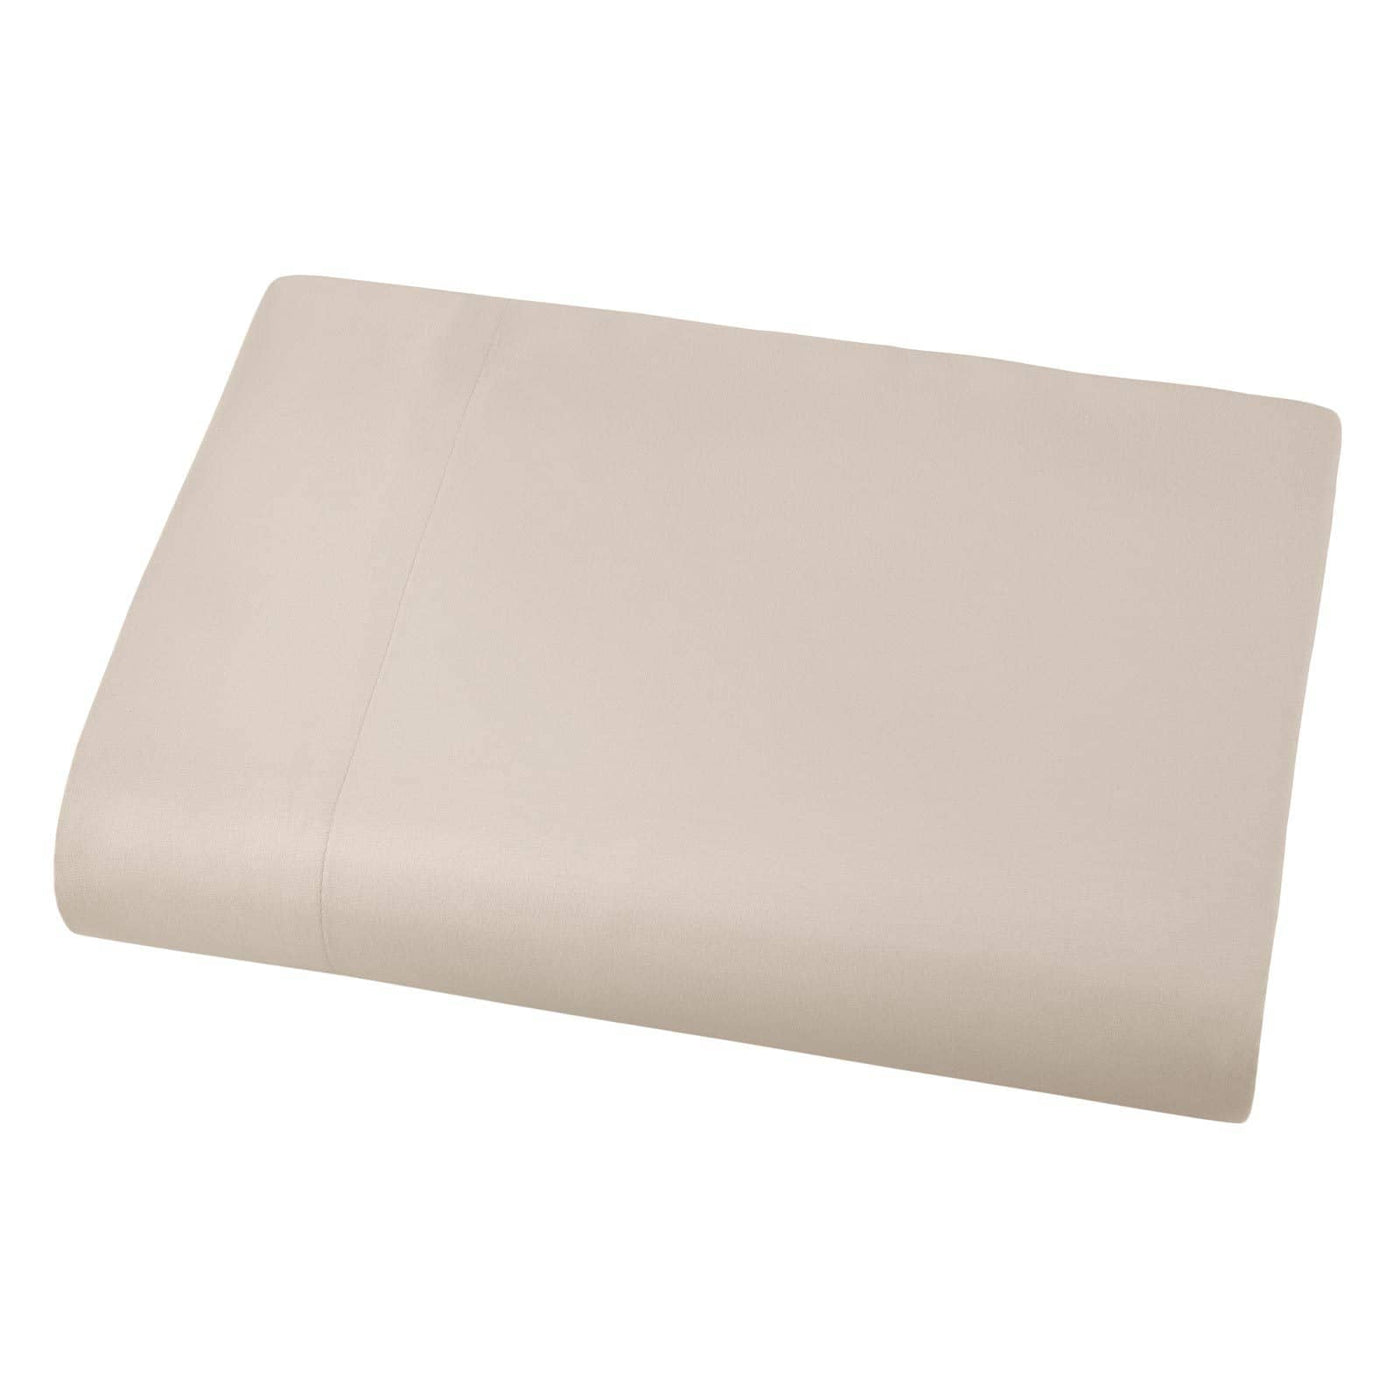 Soft and Luxurious Over-sized Flat Sheet 132 in x 110 in by Vilano springs in Bone#color_vilano-bone